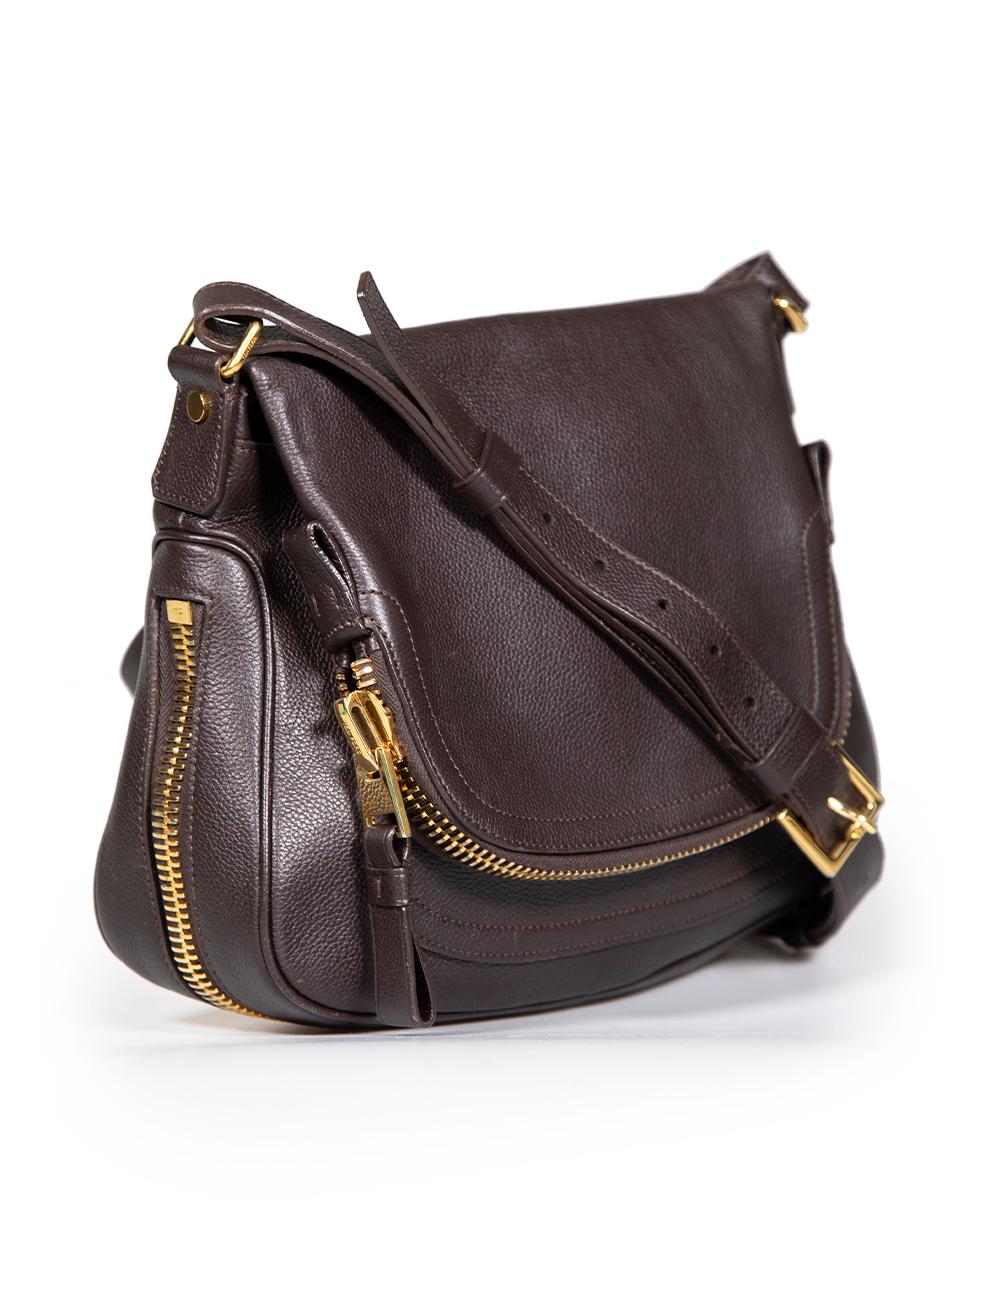 CONDITION is Very good. Minimal wear to bag is evident. Minimal wear to base corners, piping, strap and under the flap with abrasion and tarnishing on the hardware on this used Tom Ford designer resale item.
 
 
 
 Details
 
 
 Model: Jennifer
 
